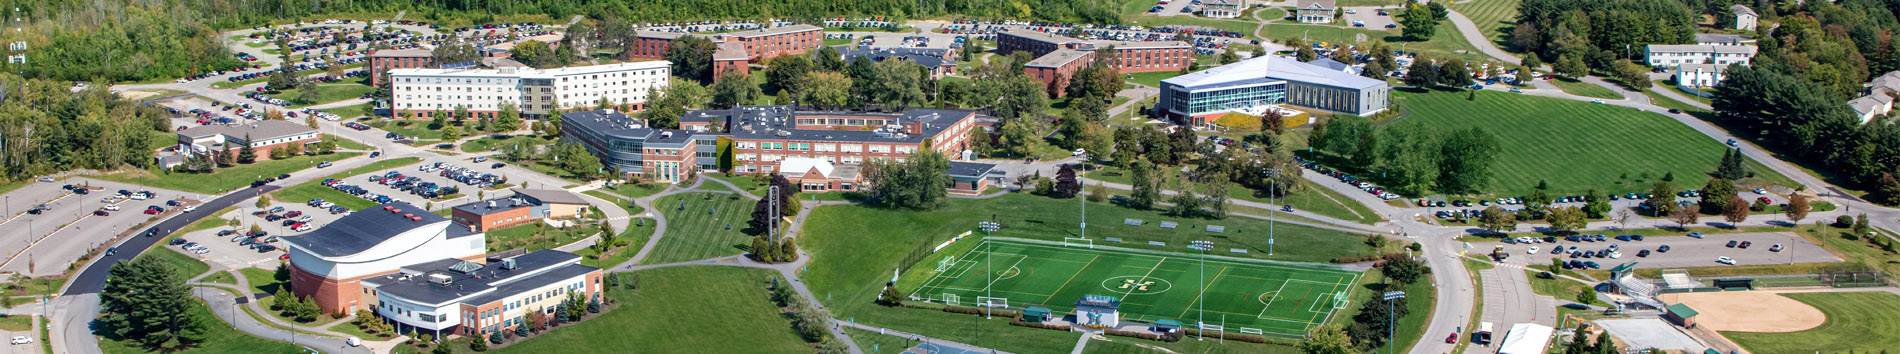 An aerial view of the campus of Husson University